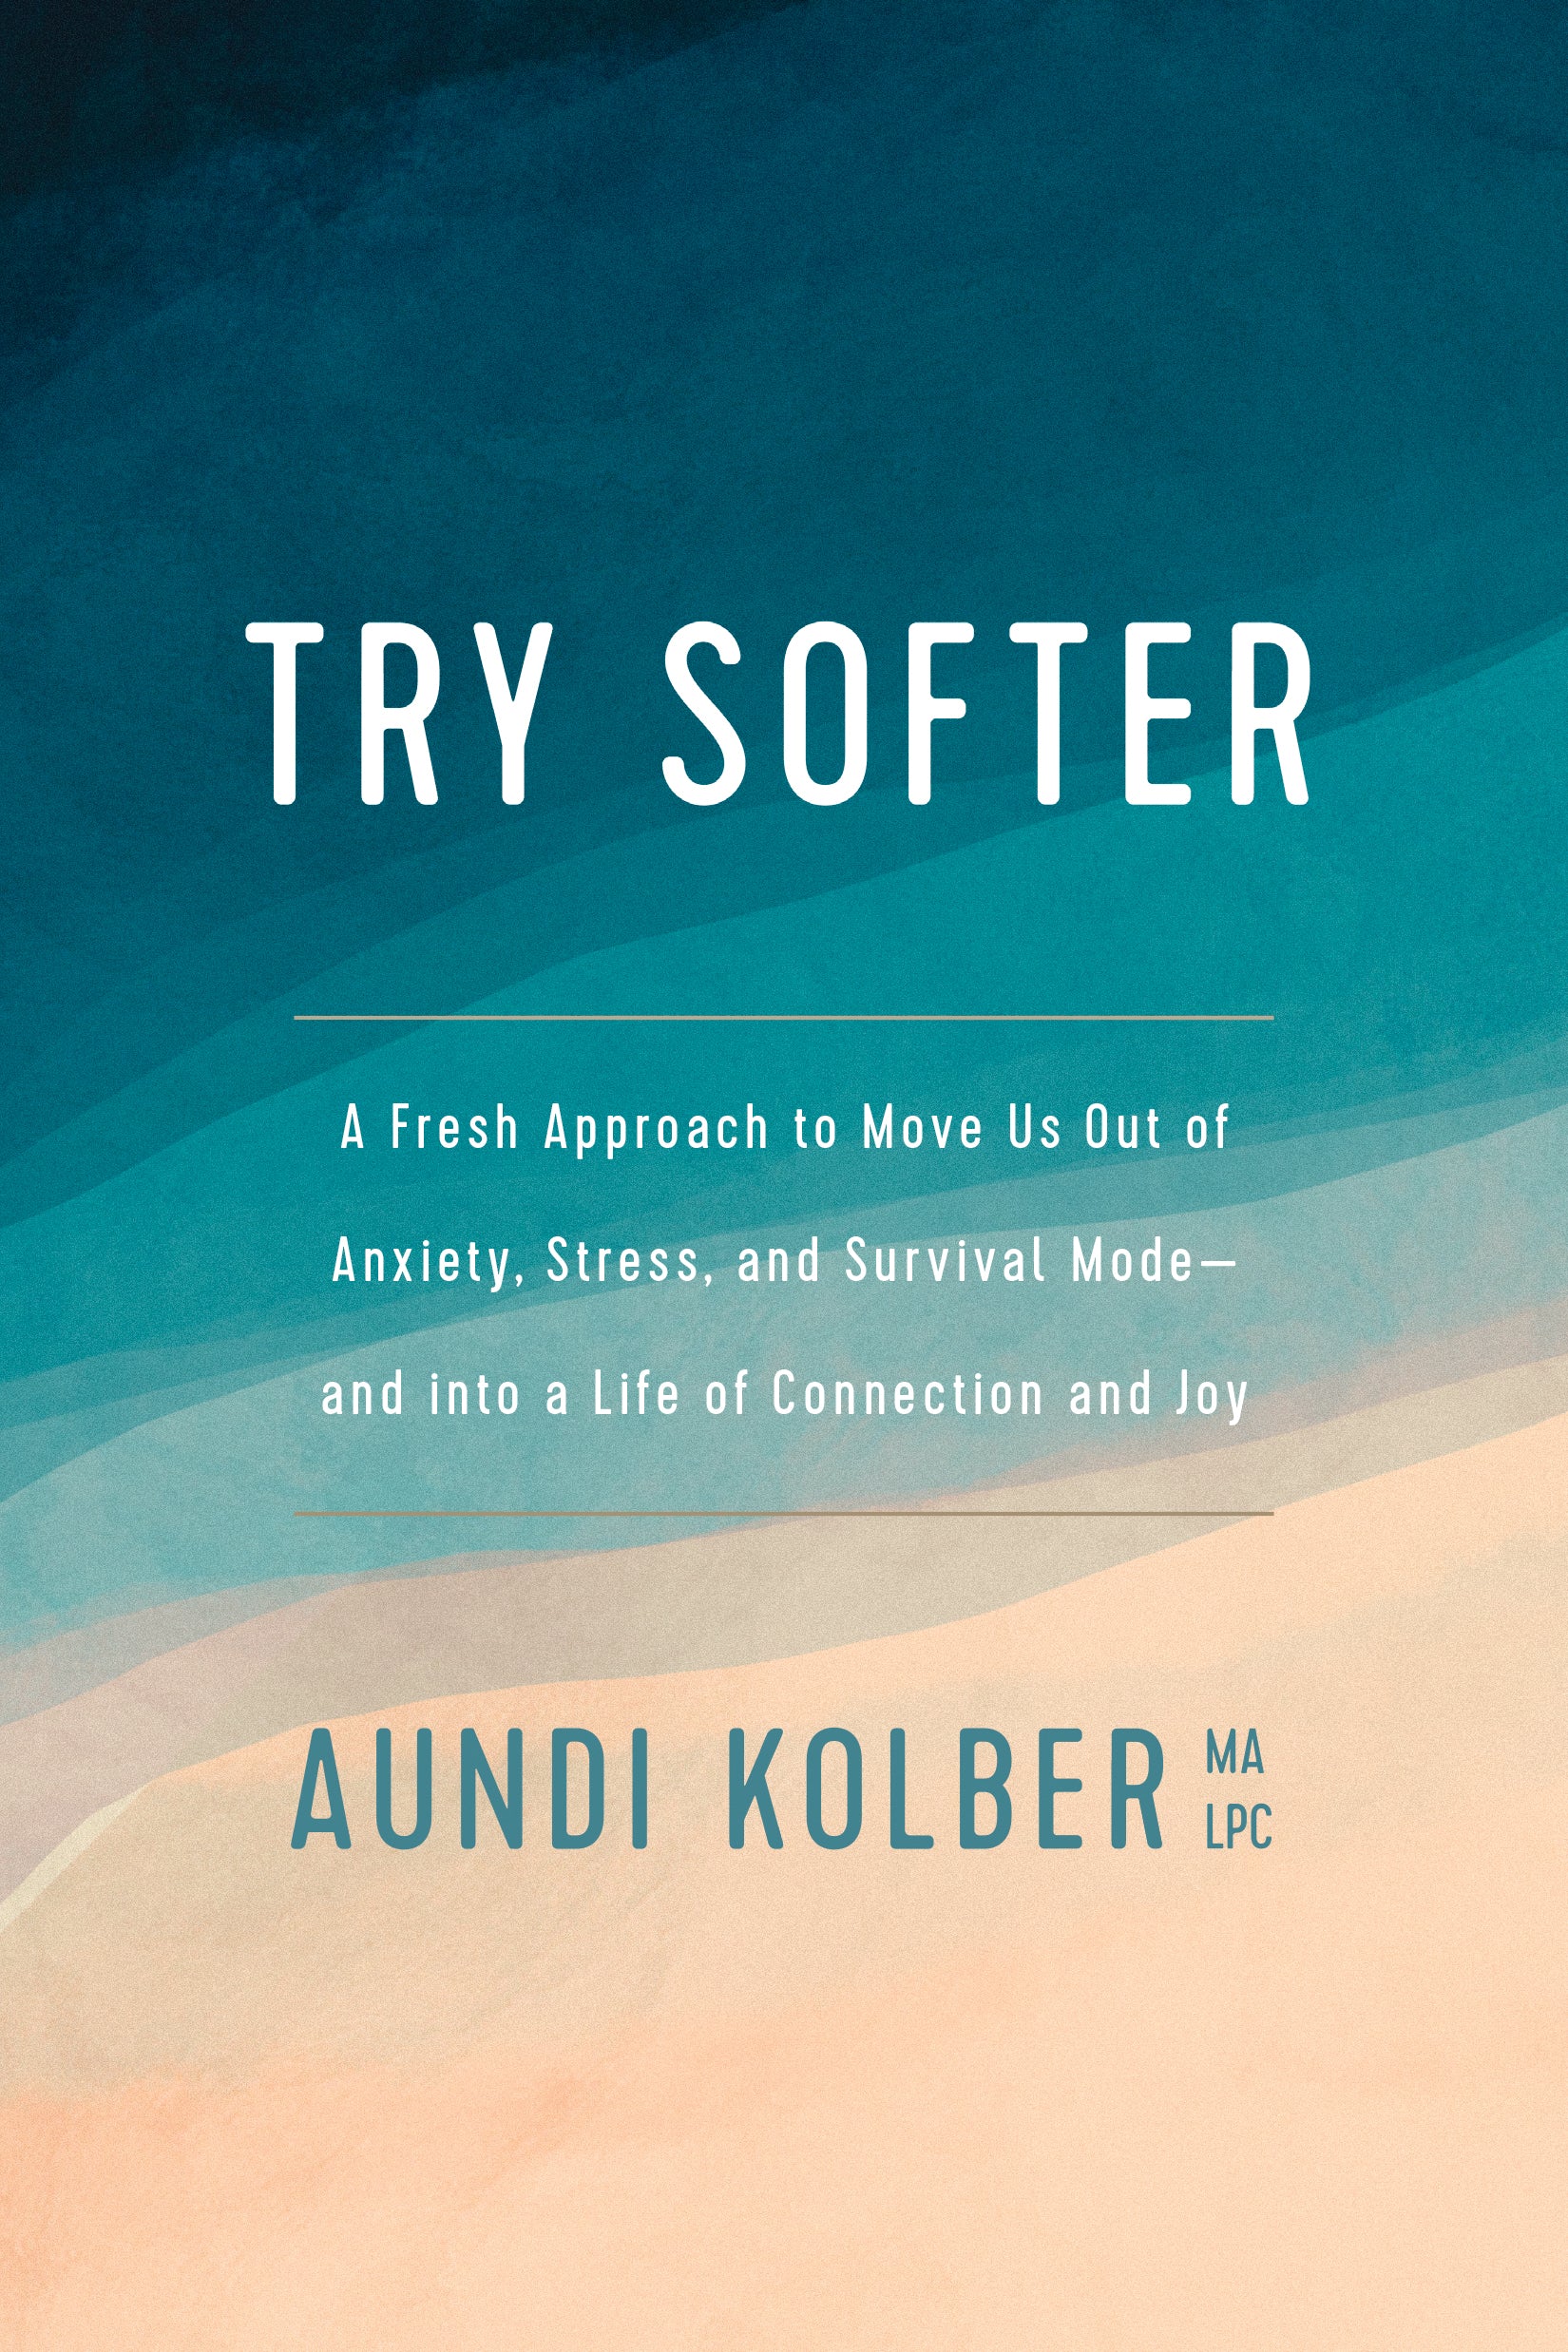 Image of Try Softer other